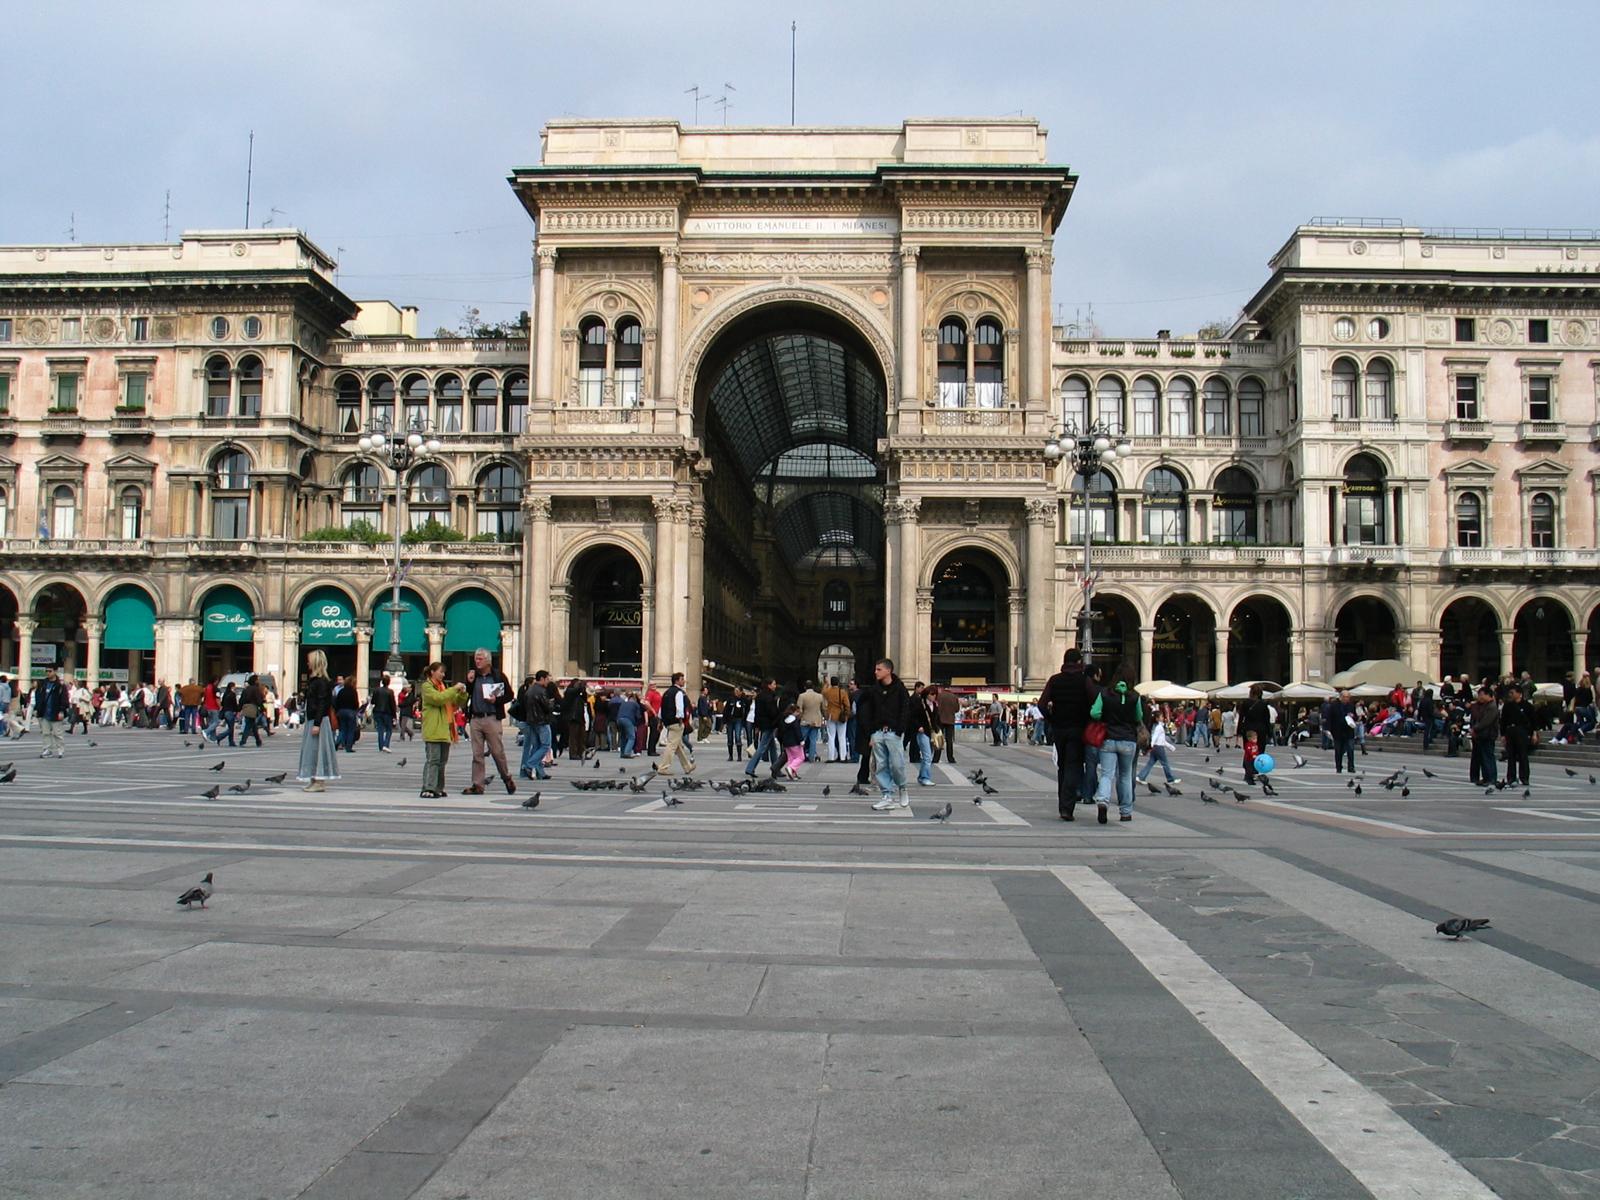 Piazza Fontana and the Galleria